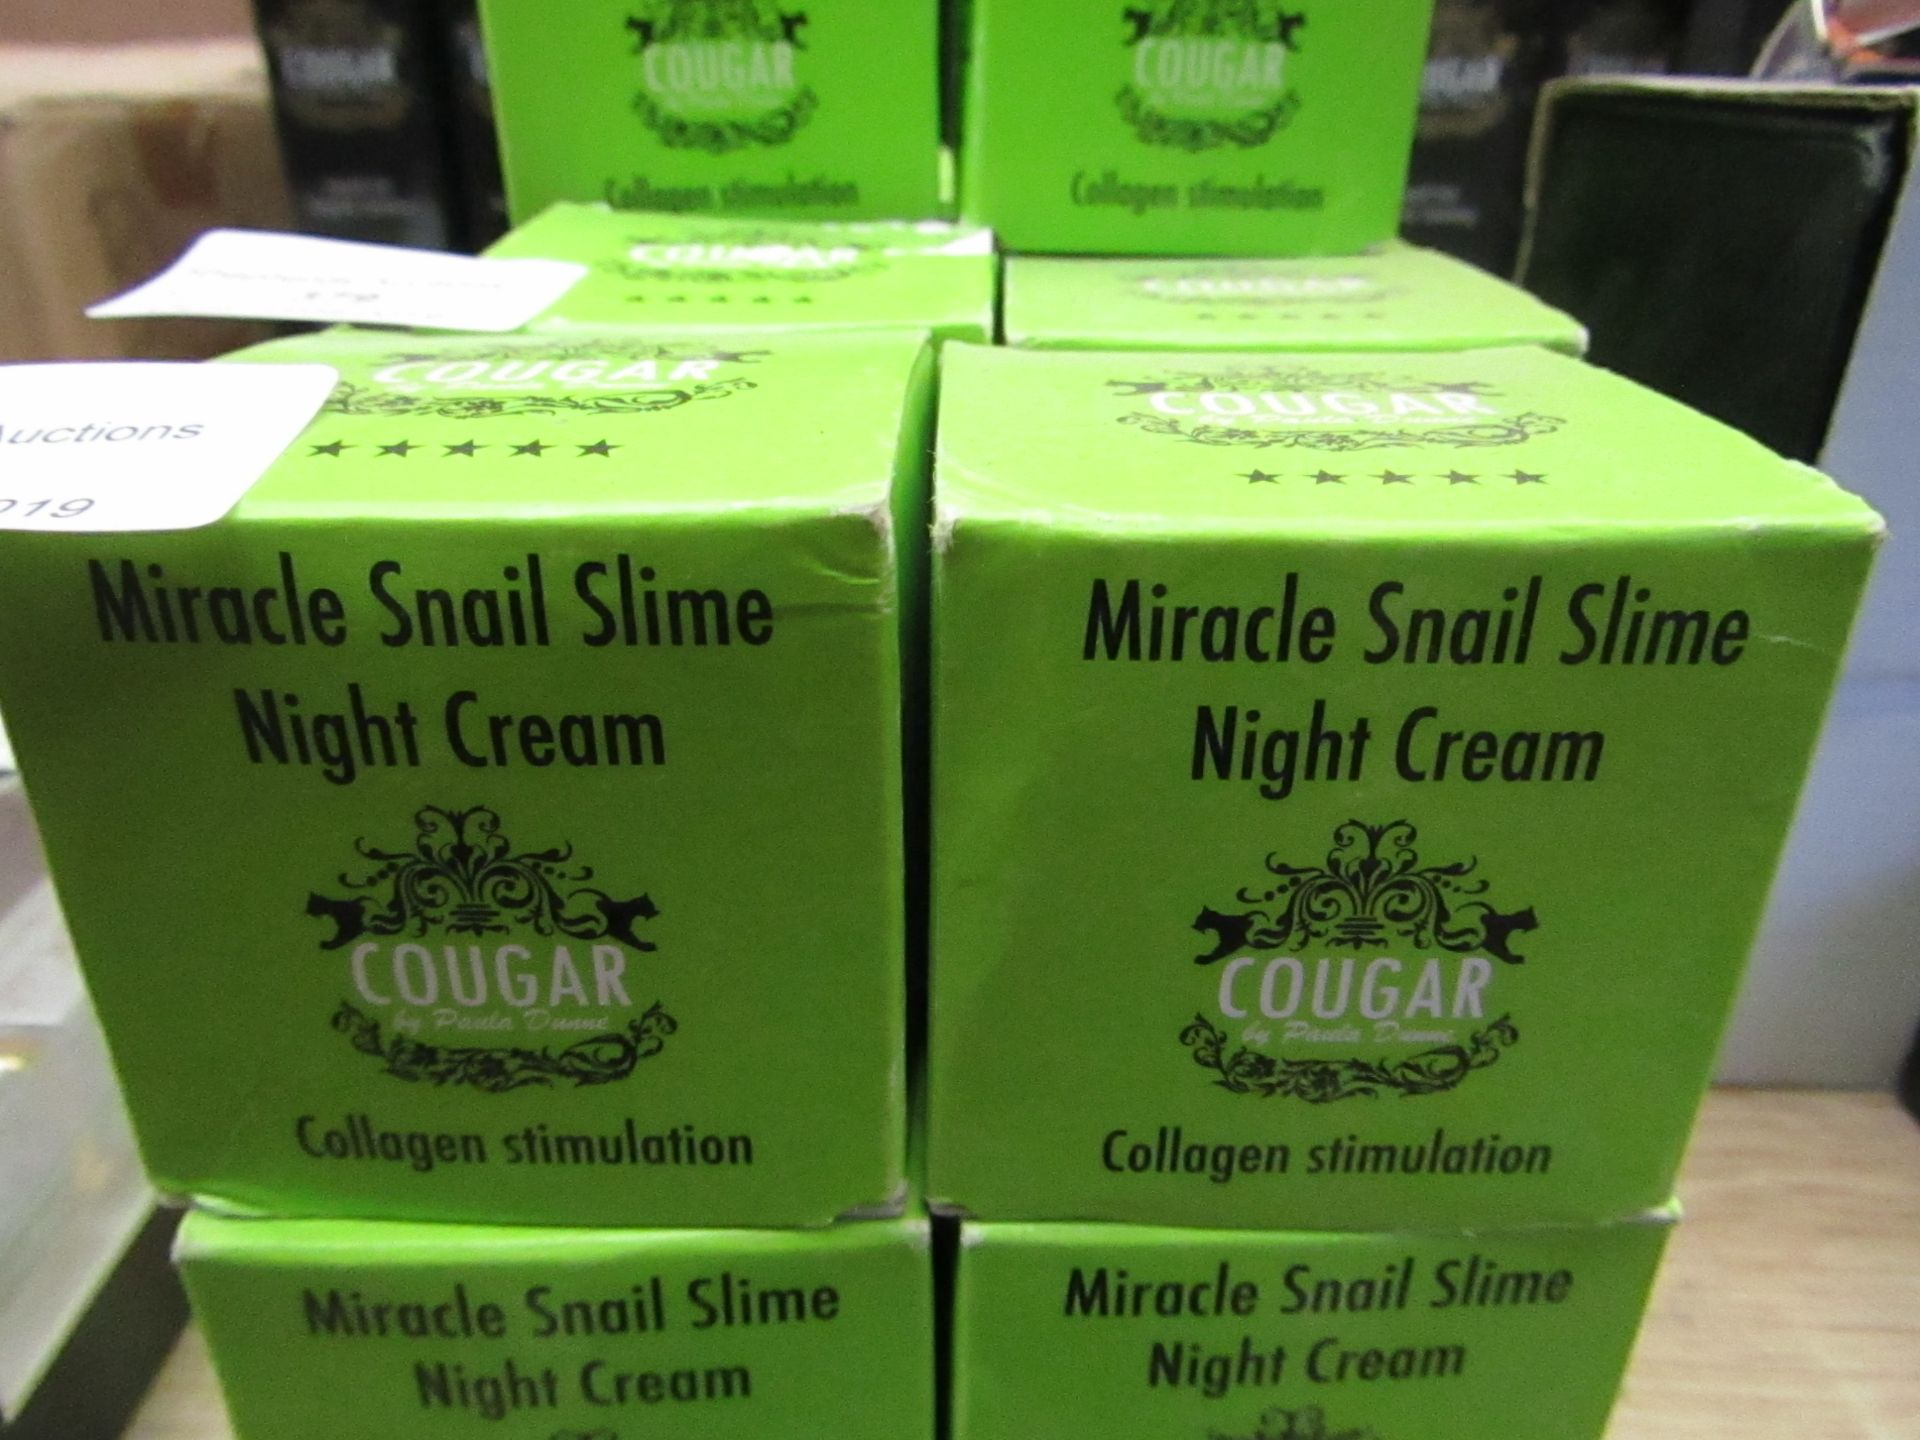 2 x 50ml tubs of Cougar Snail slime Night cream, boxed